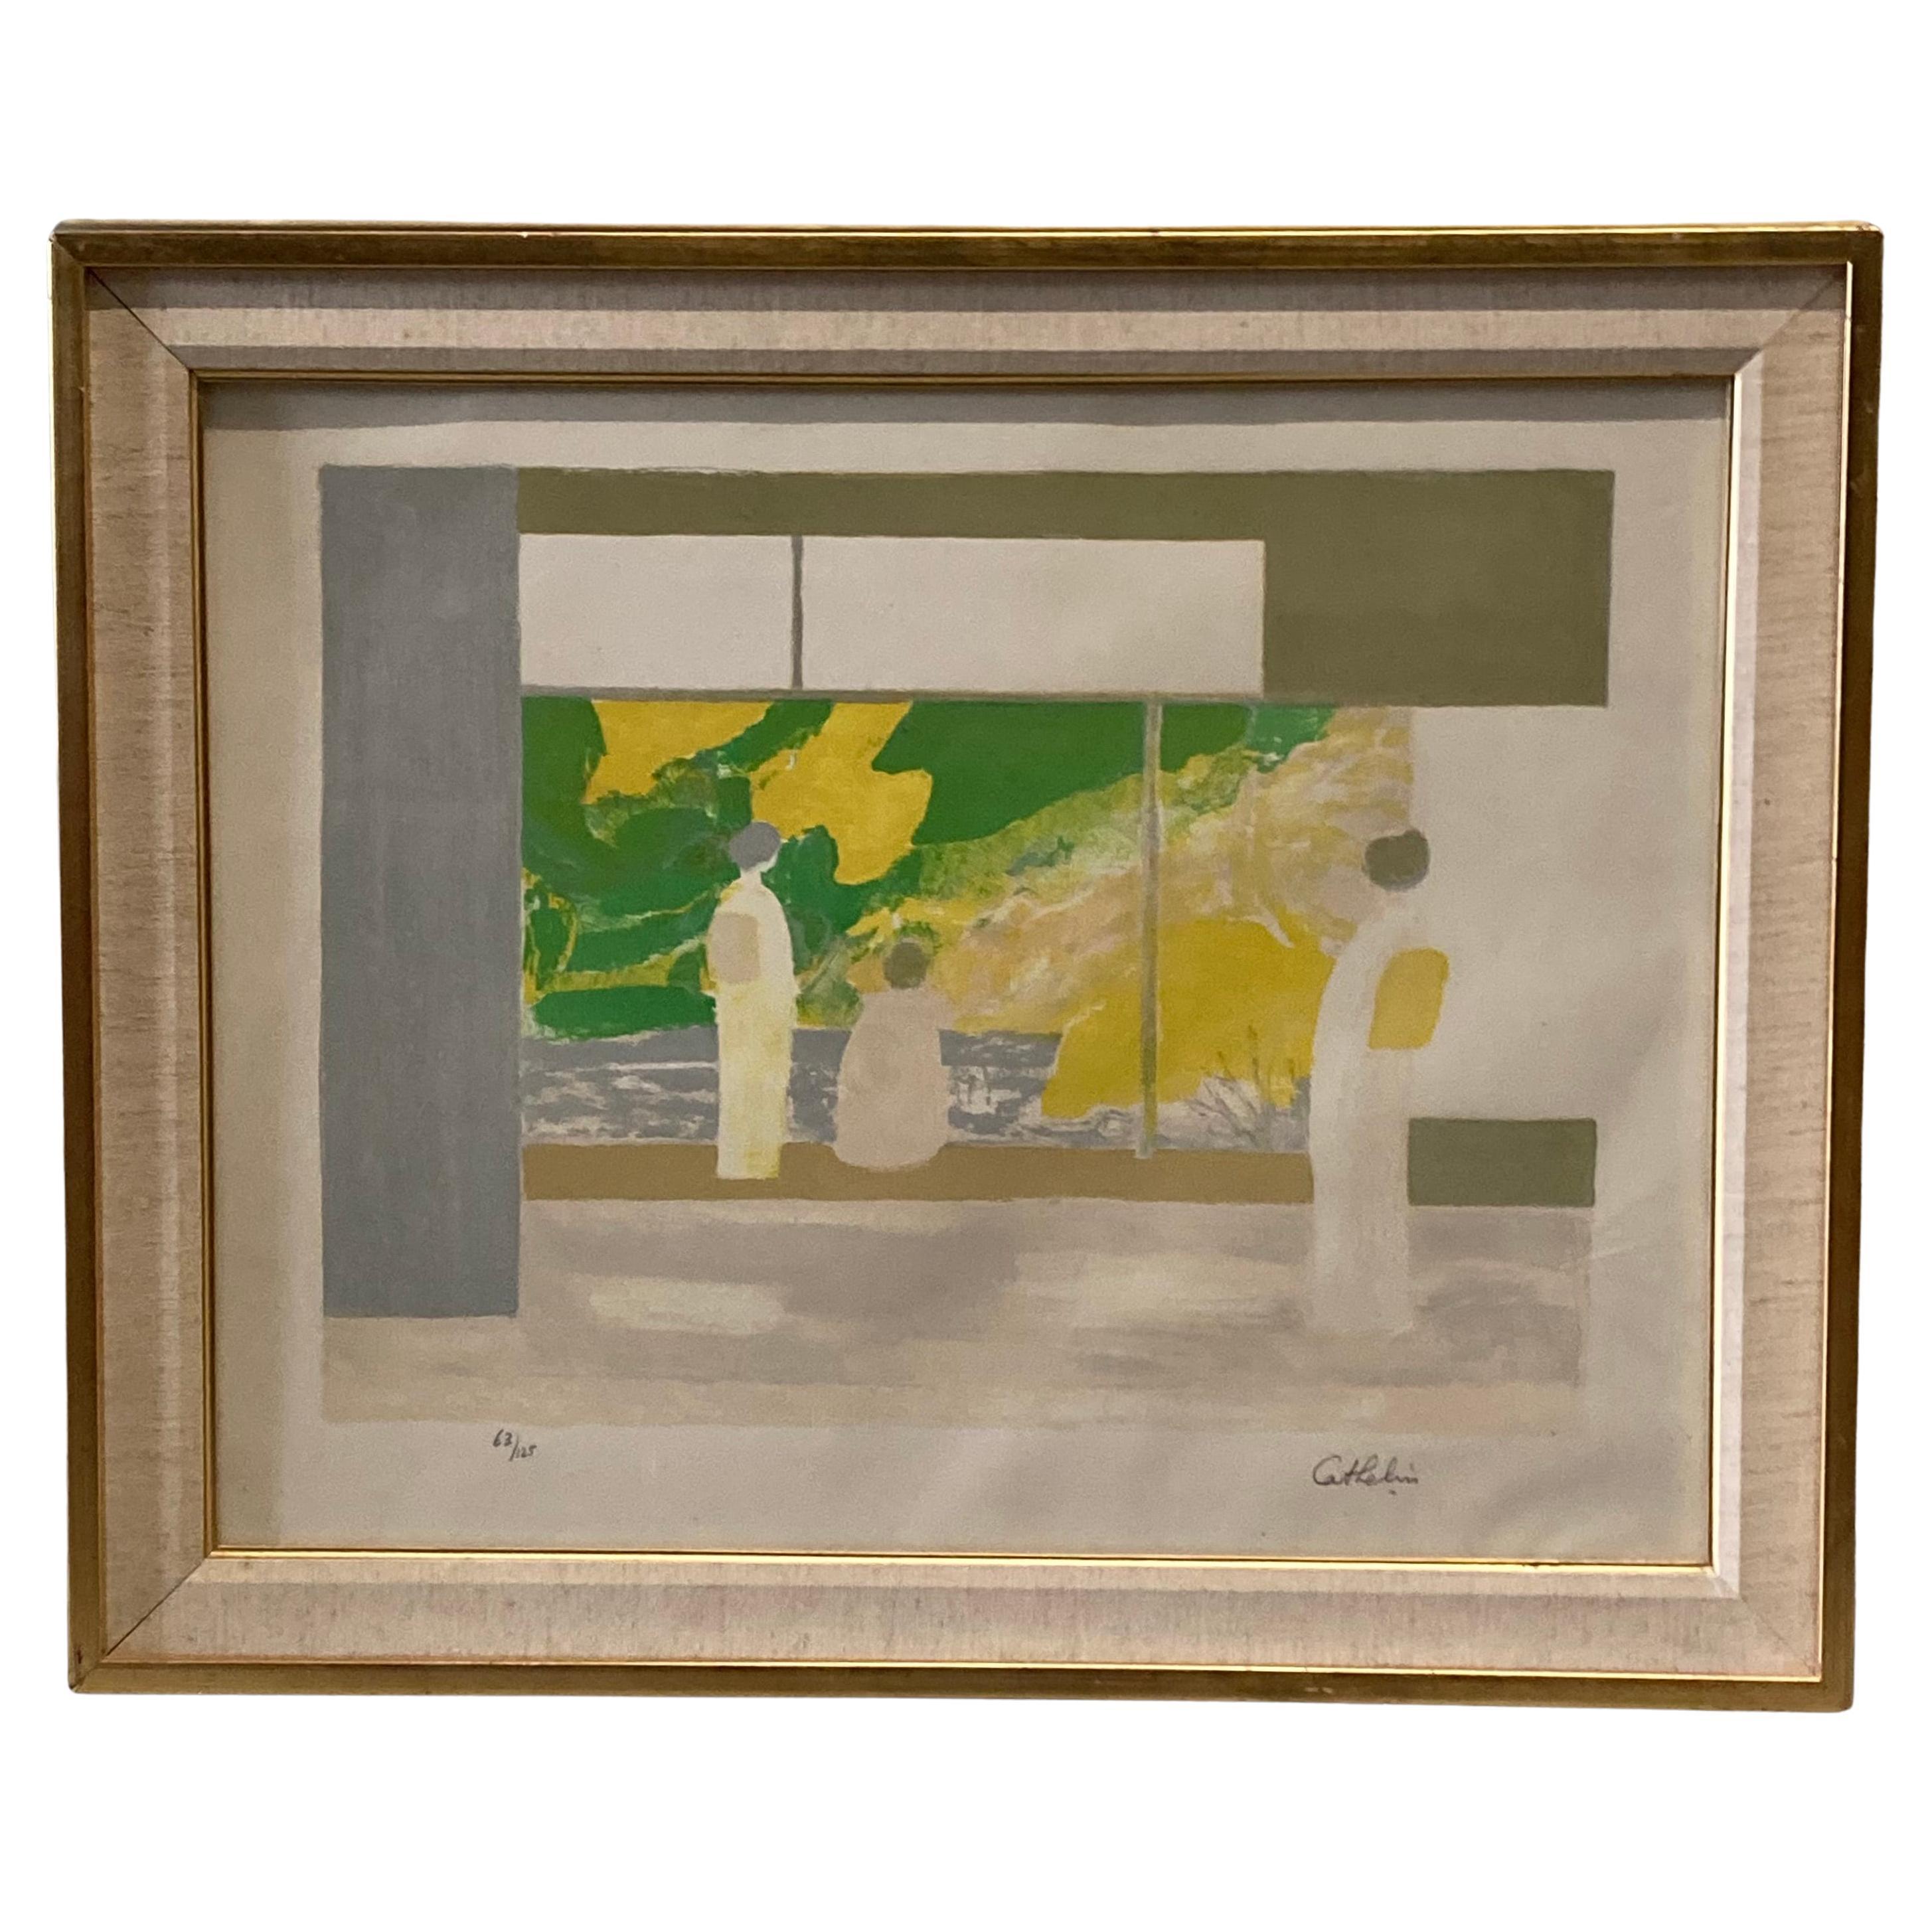 Bernard Cathelin (French, 1919-2004), 'Ladies at the Window', Circa 1970, Signed